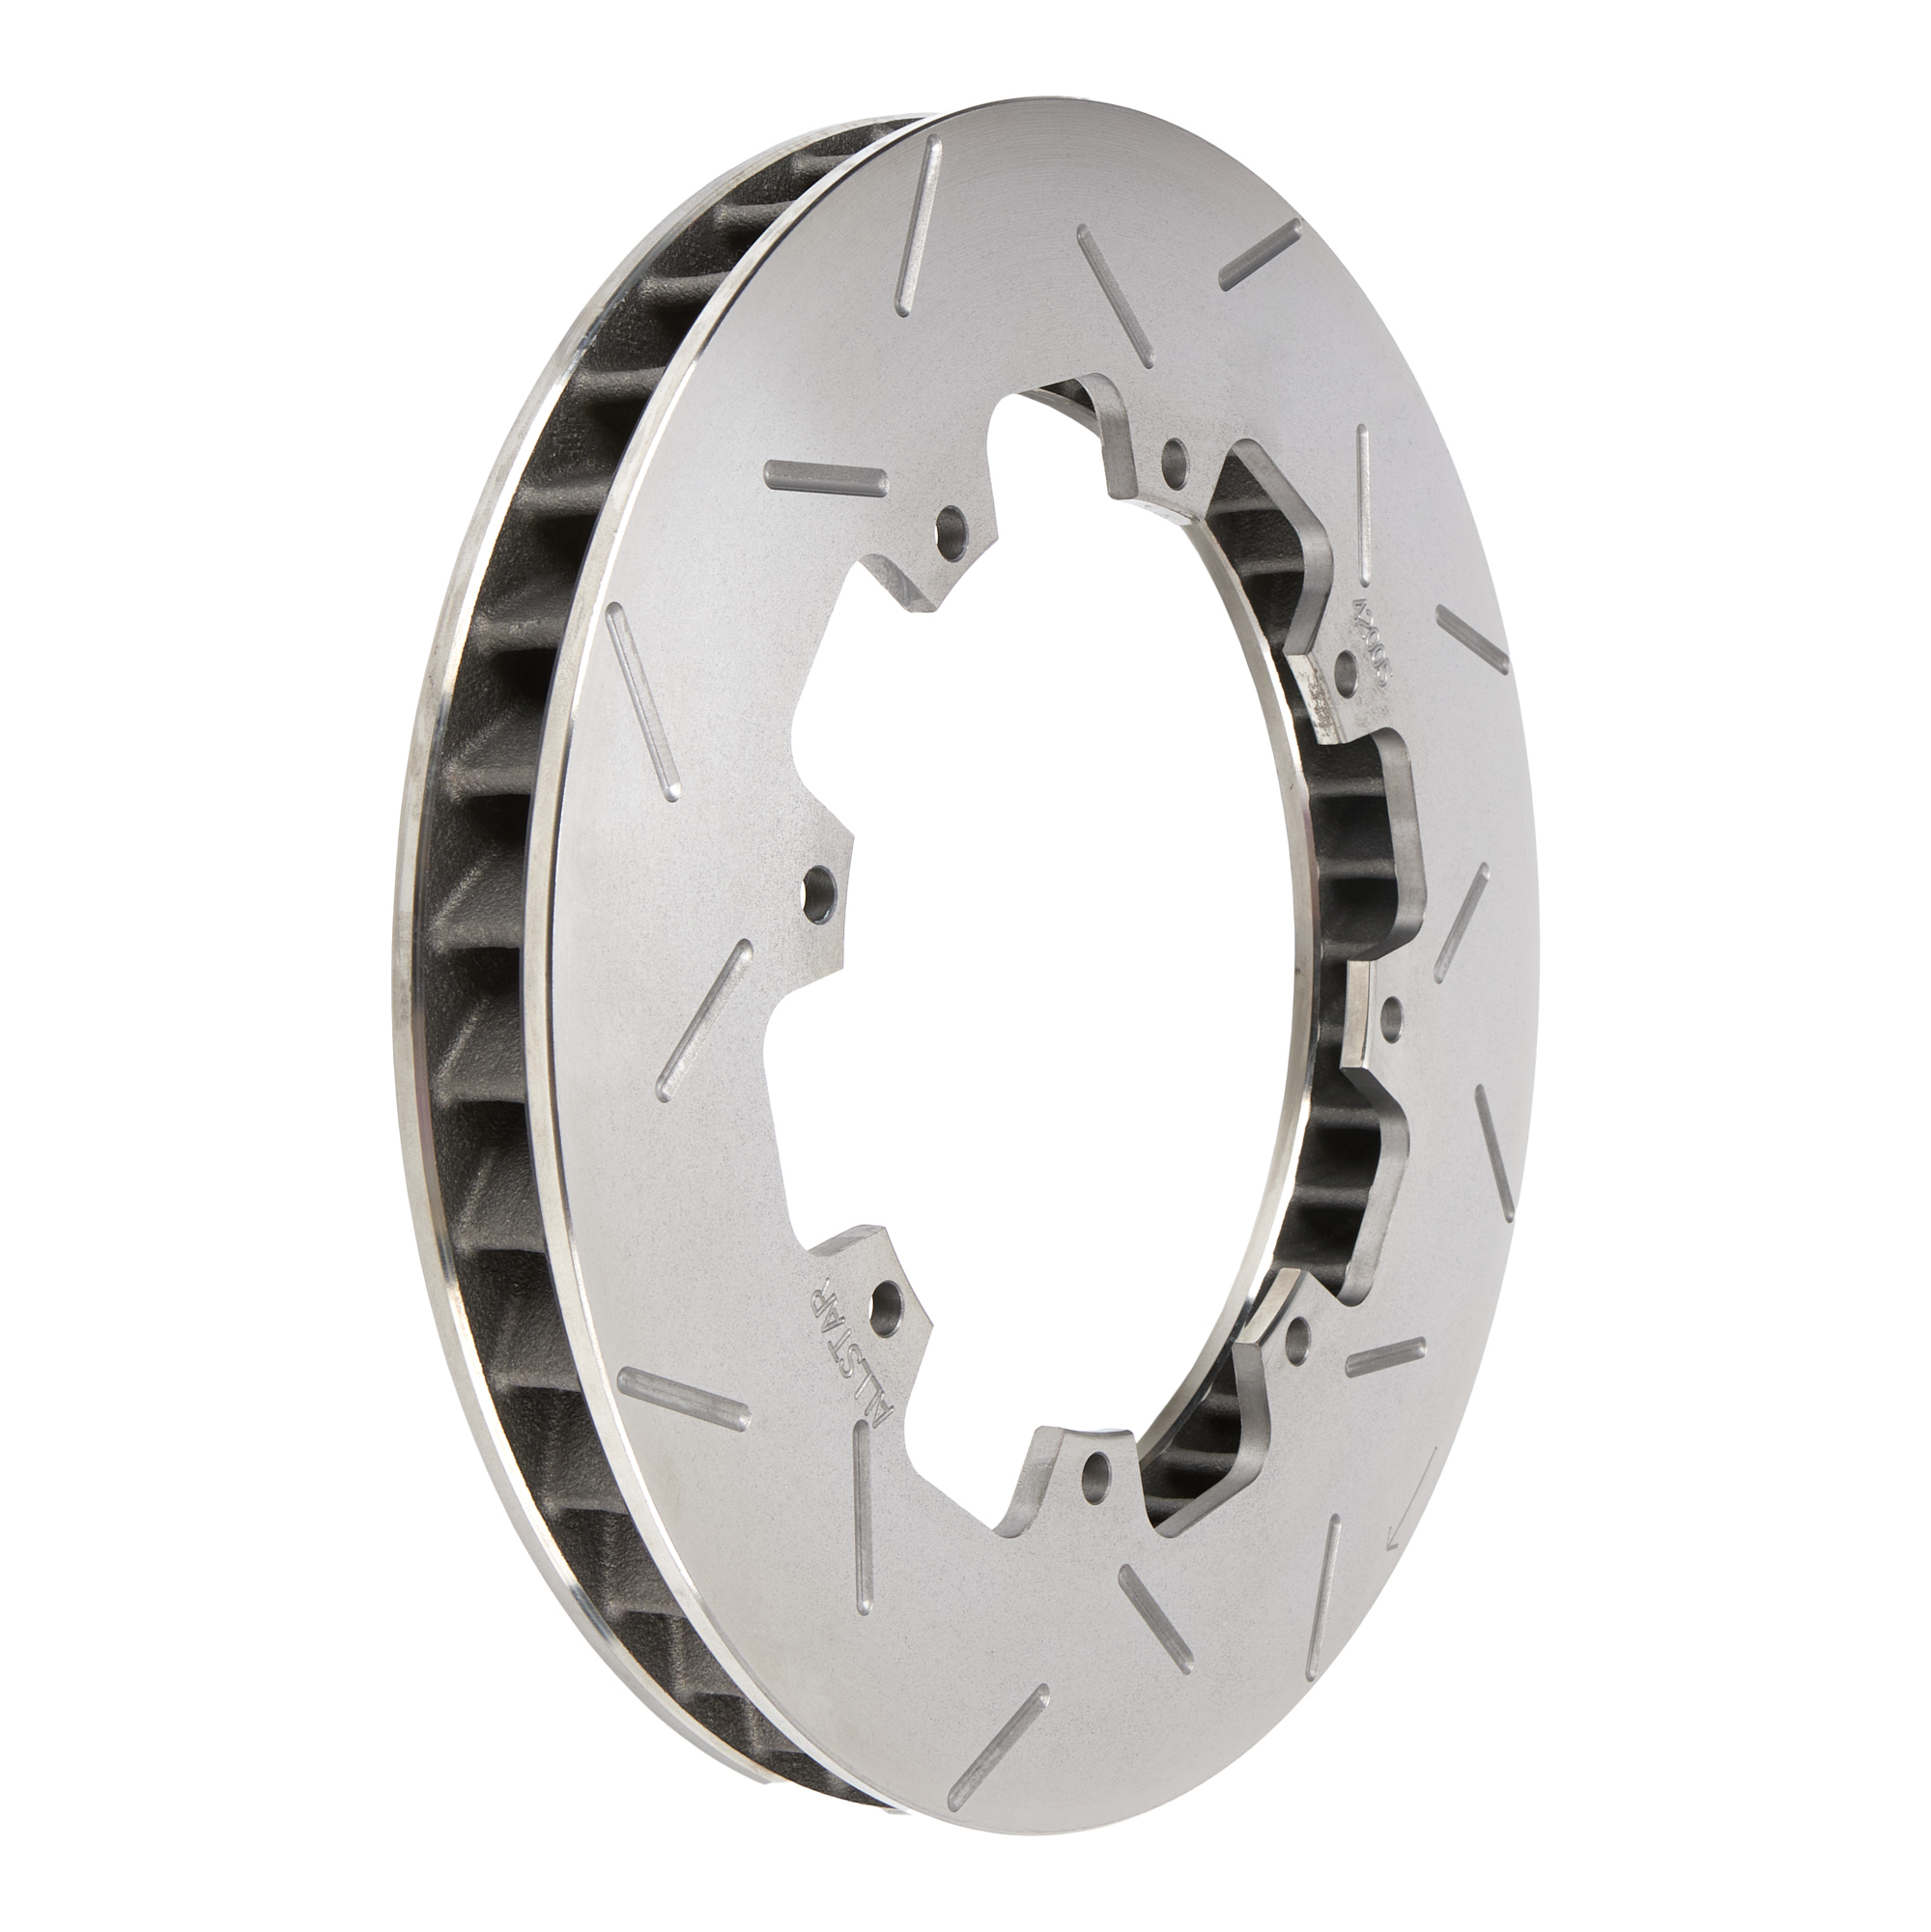 Allstar Performance 42005 Brake Rotor, 40 Vane, Passenger Side, Directional / Slotted, 11.750 in OD, 1.250 in Thick, 8 x 7.000 in Bolt Pattern, Iron, Natural, Each